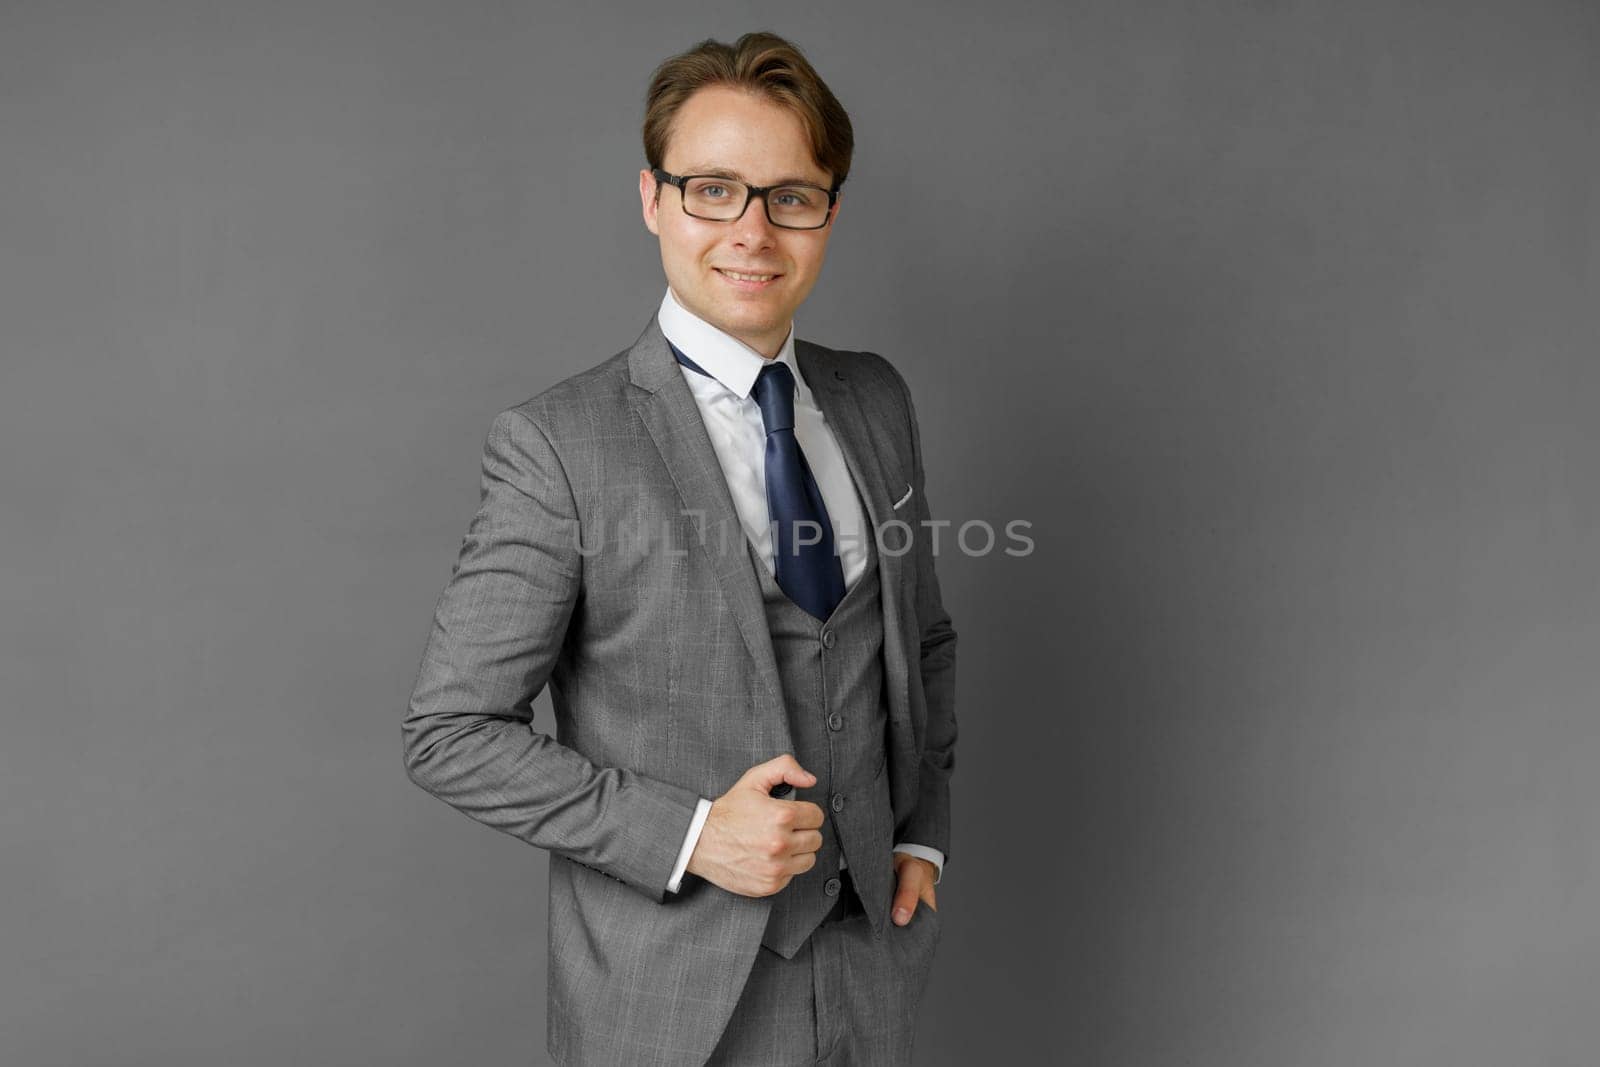 Portrait of a businessman in a suit looking at the camera. Gray background. by Sd28DimoN_1976